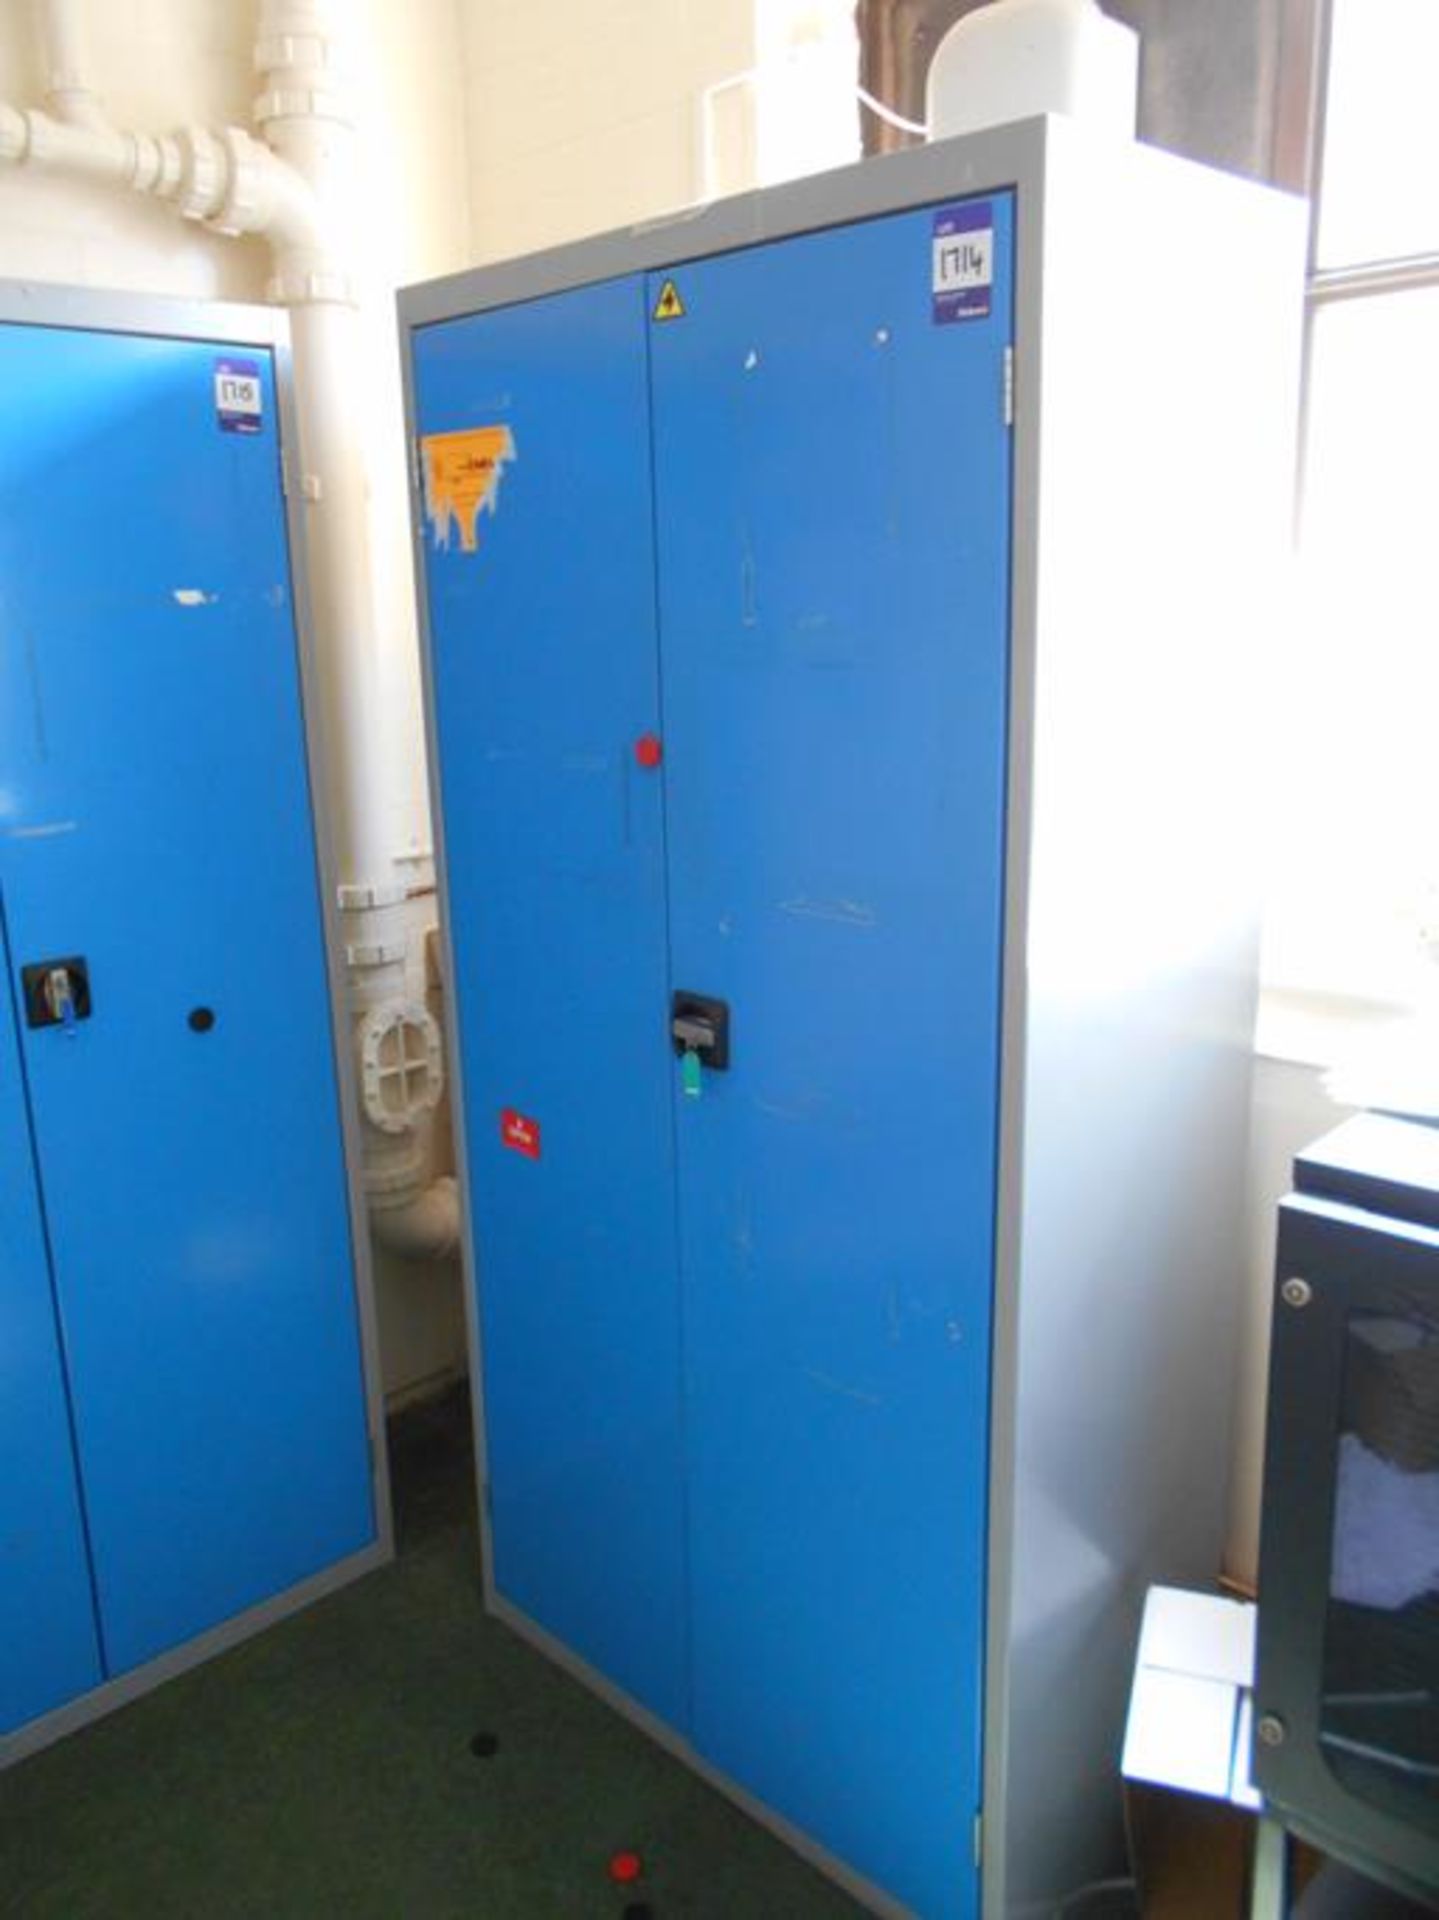 * 2 Door Metal Office Cabinet 2000 x 1000 x 500 Photographs are provided for example purposes only